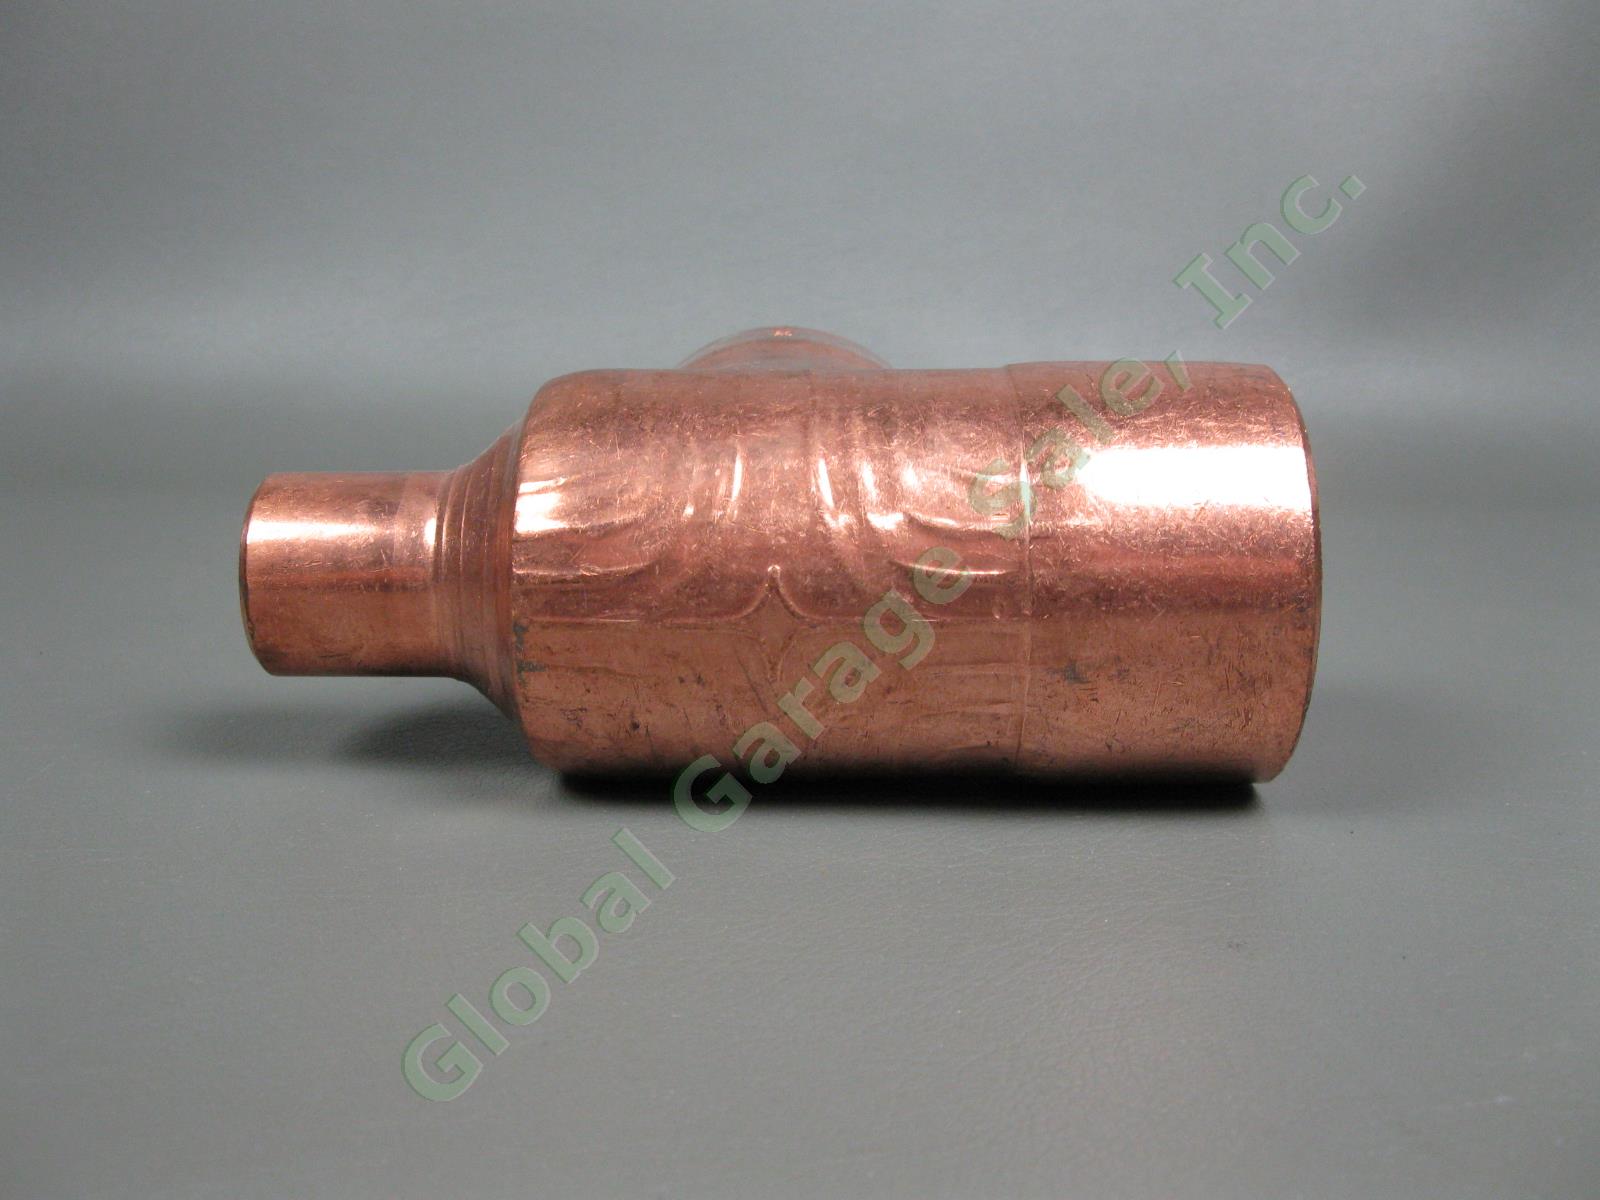 NEW 1" x 2" x 2" Copper EPC Reducing Sweat Tee Pipe Fitting Run Connection Eqpt 5